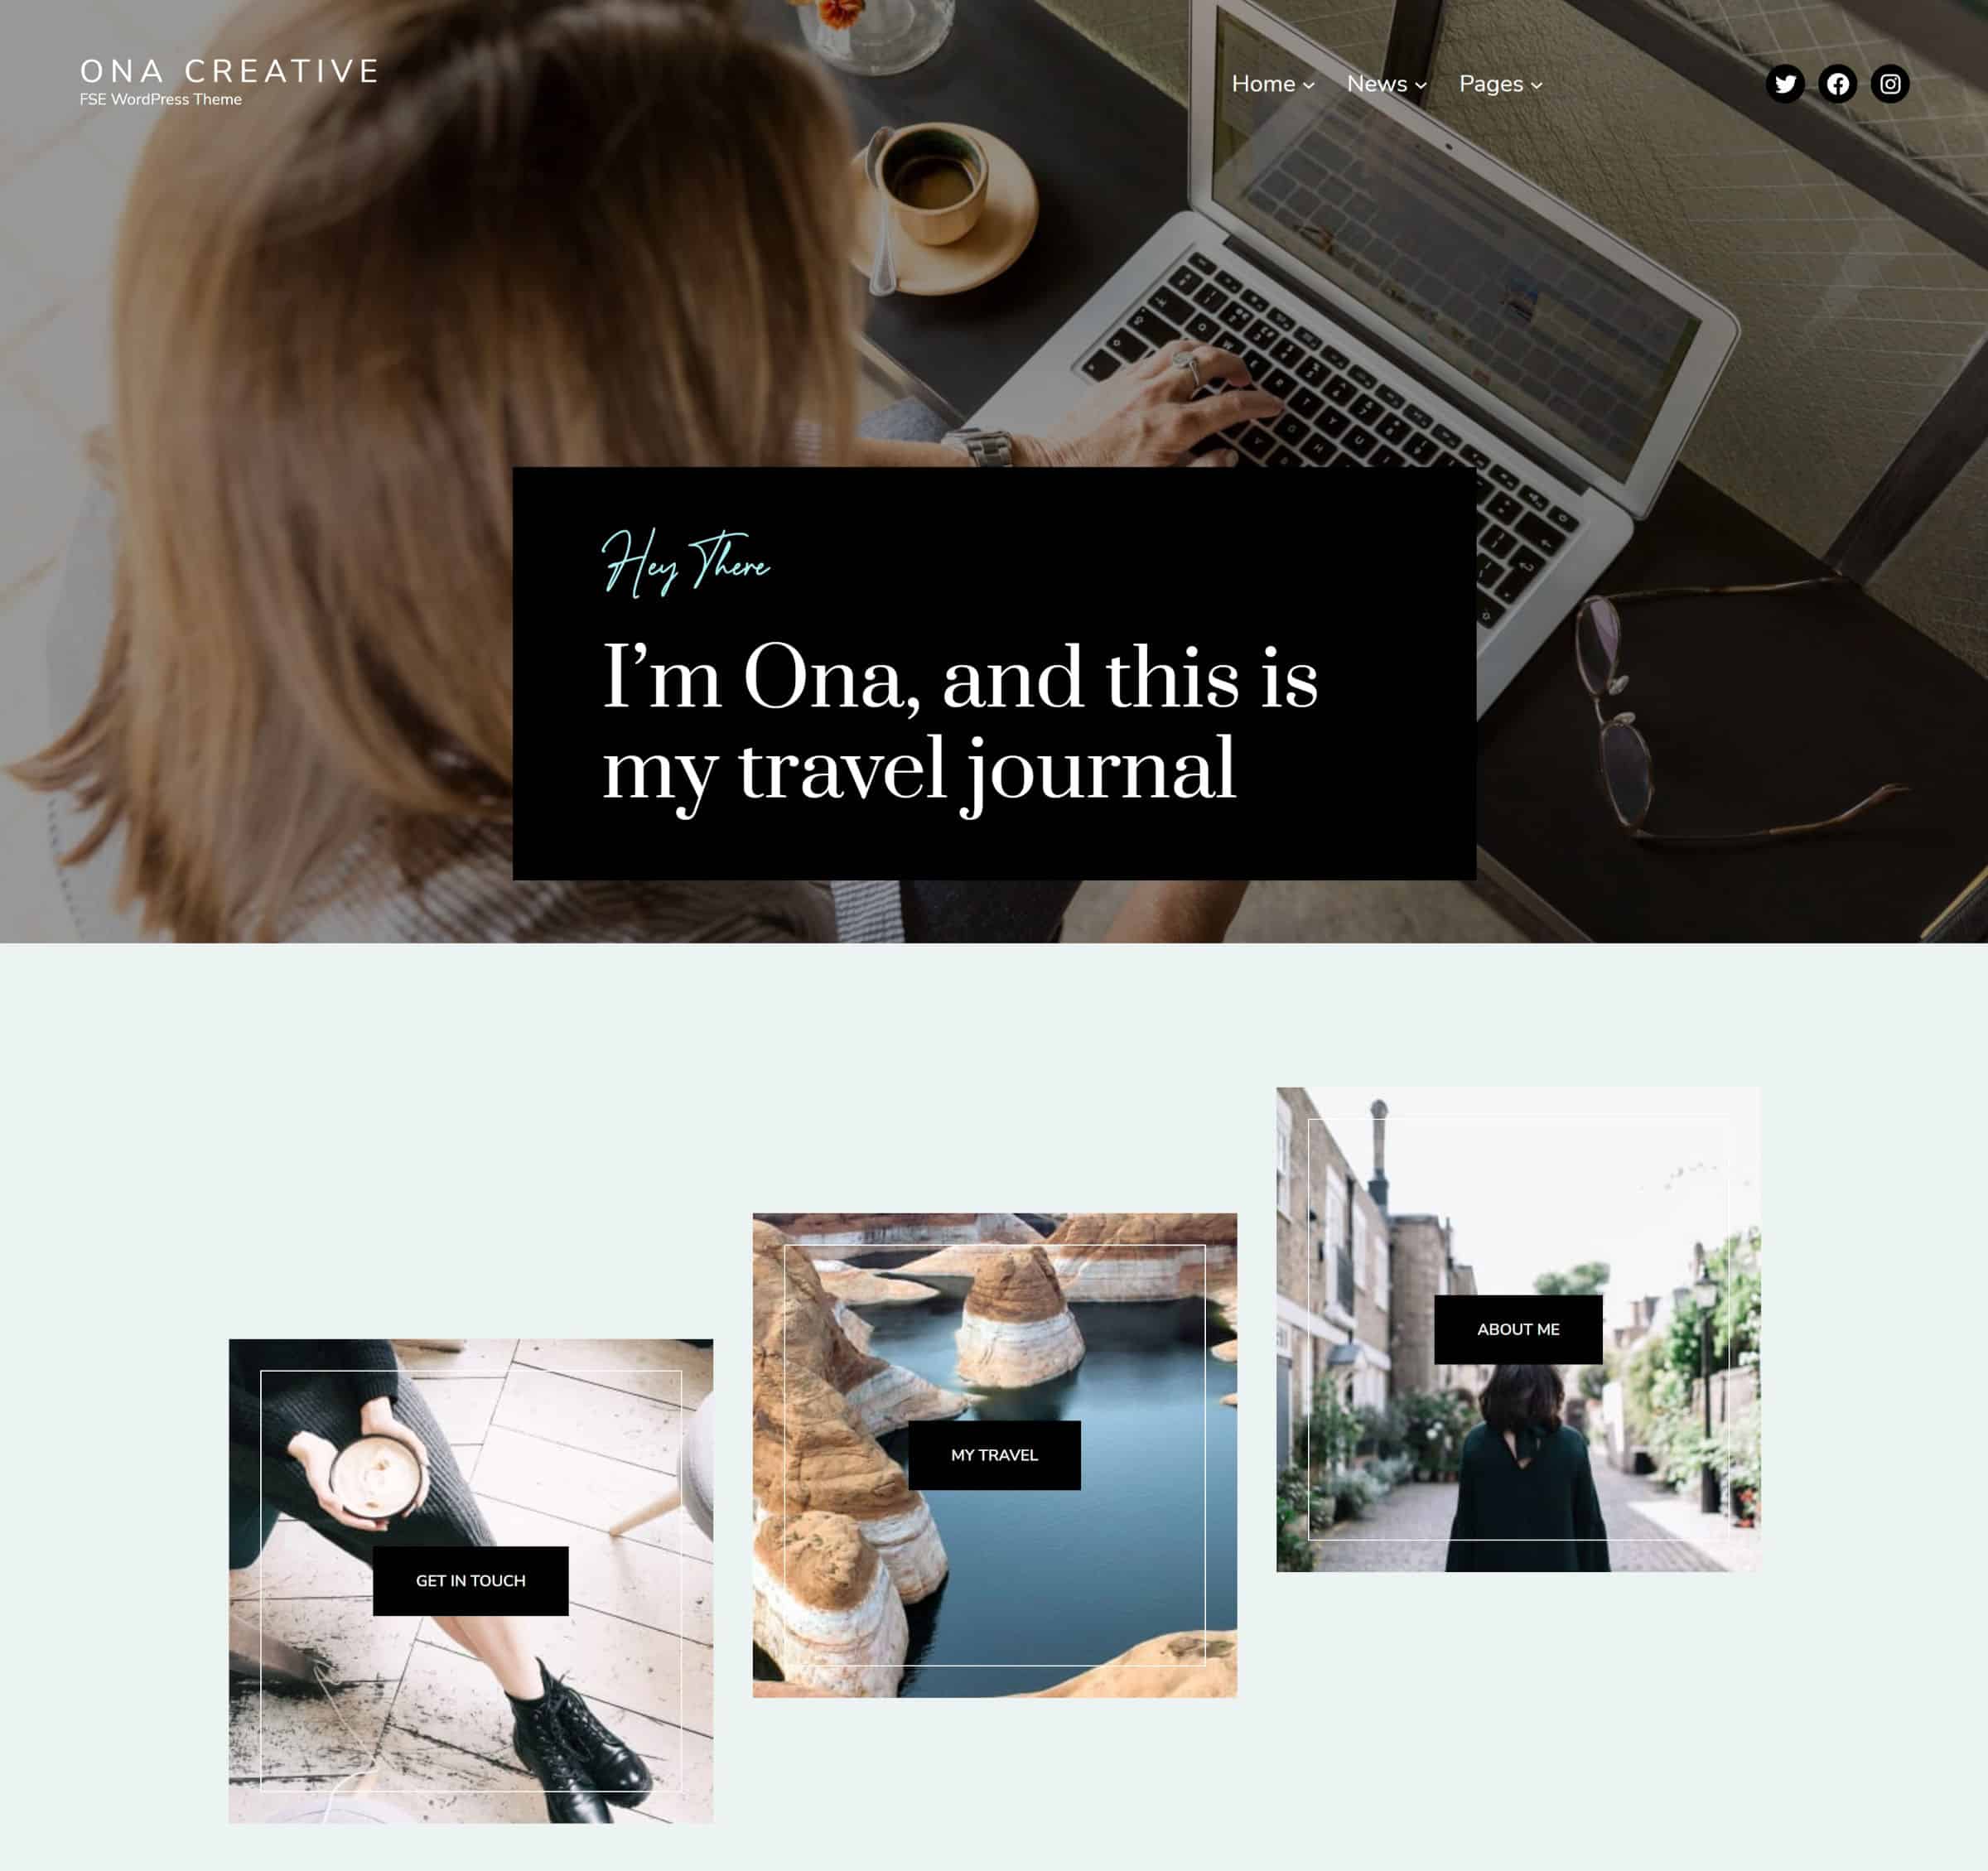 deothemes-launches-ona-creative-another-well-design-wordpress-block-theme DeoThemes 推出 Ona Creative，另一個精心設計的 WordPress 塊主題